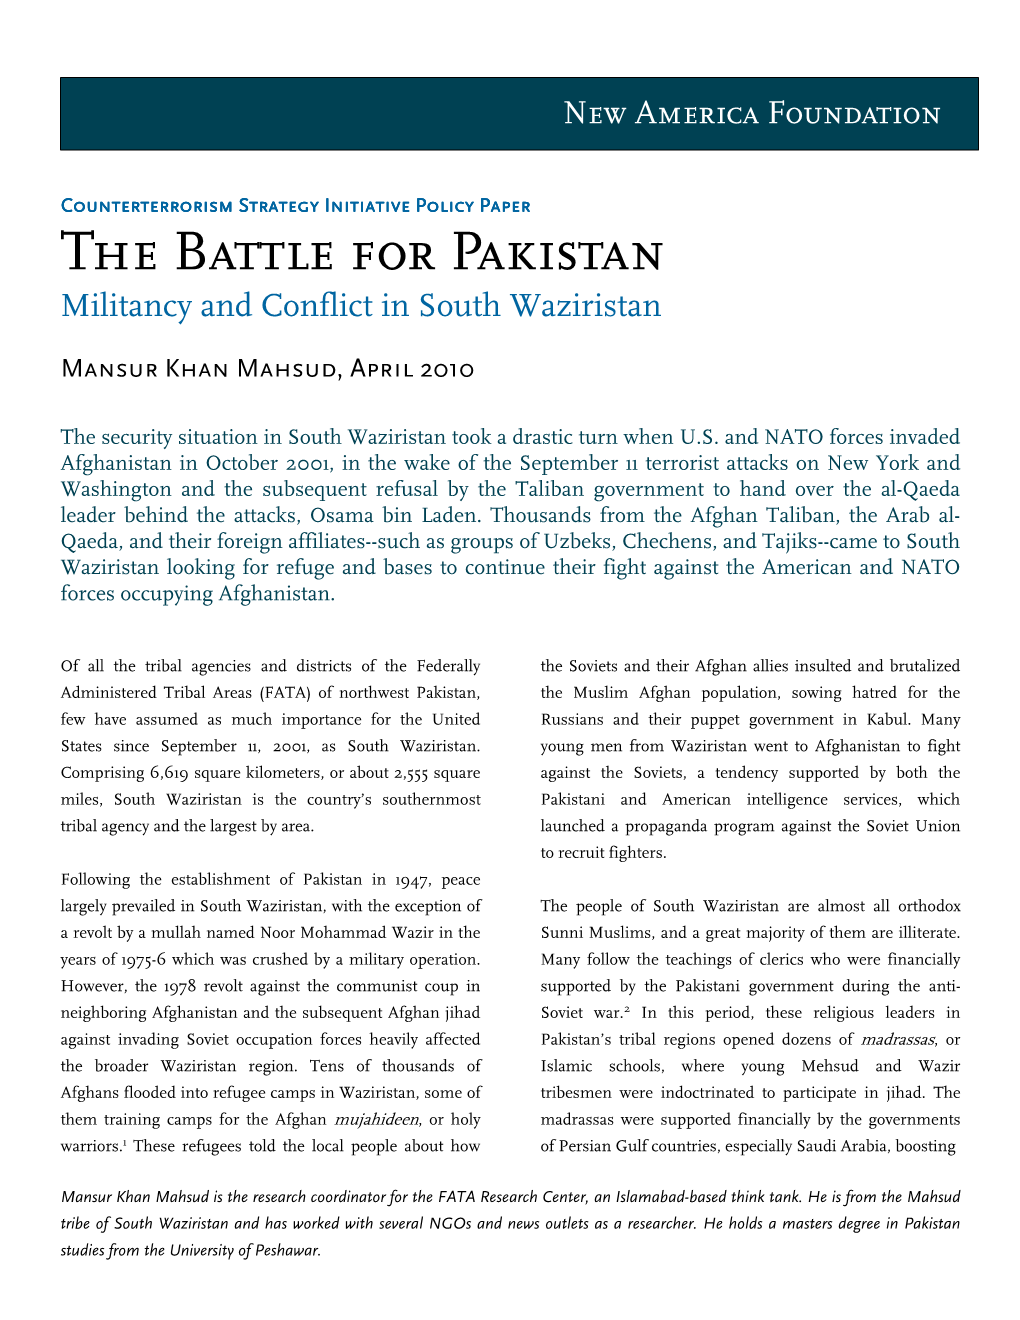 The Battle for Pakistan Militancy and Conflict in South Waziristan